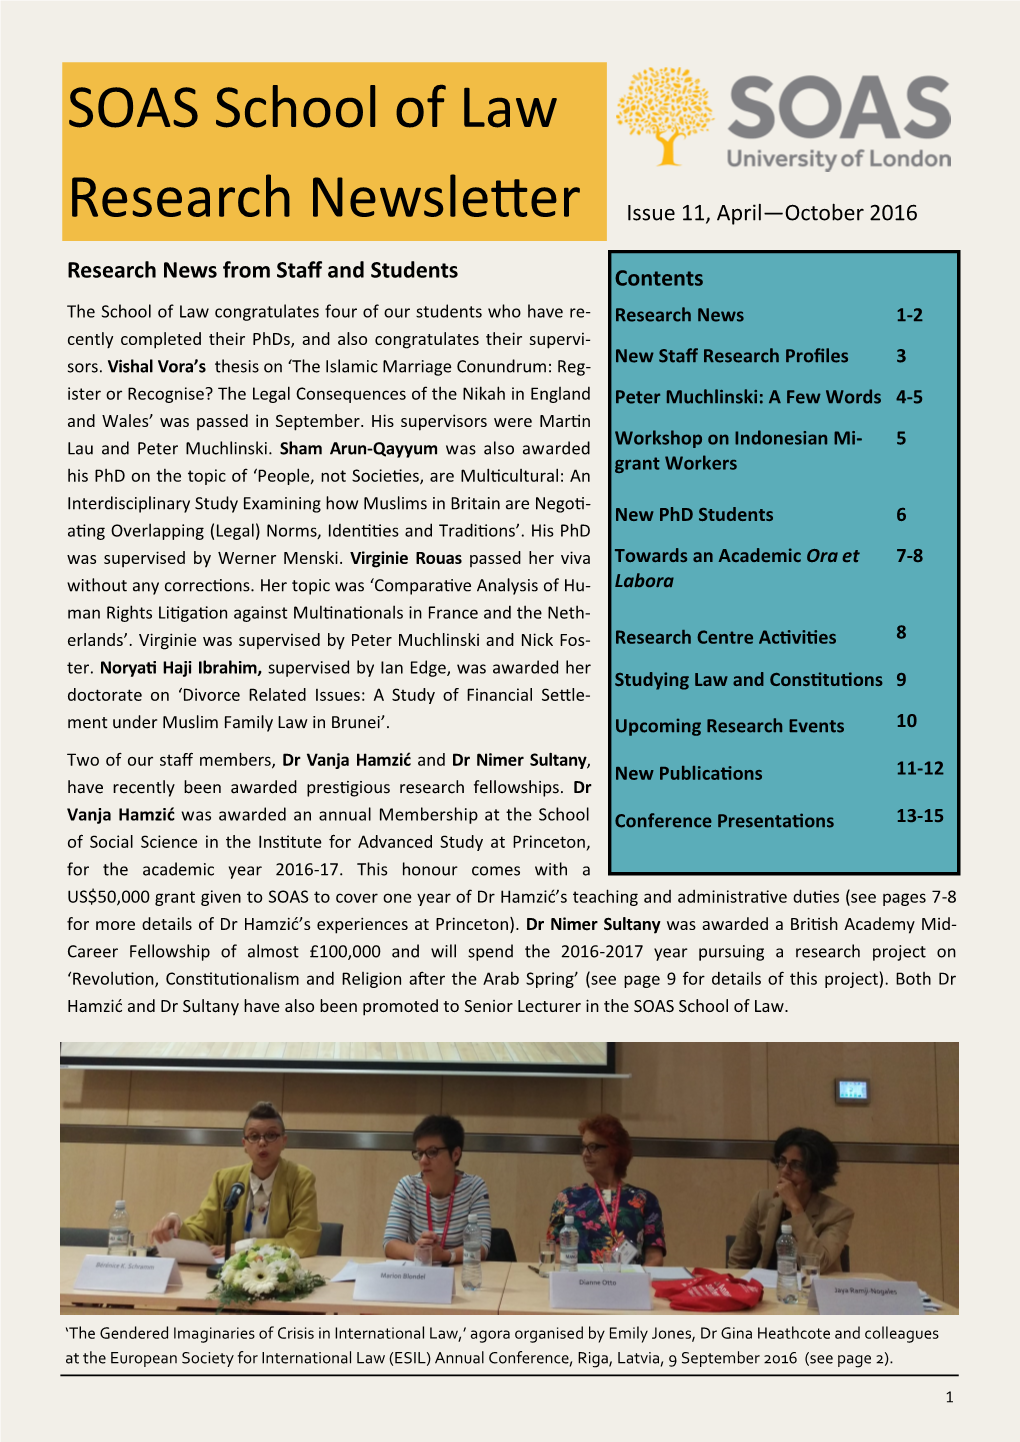 SOAS School of Law Research Newsletter Issue 11, April—October 2016